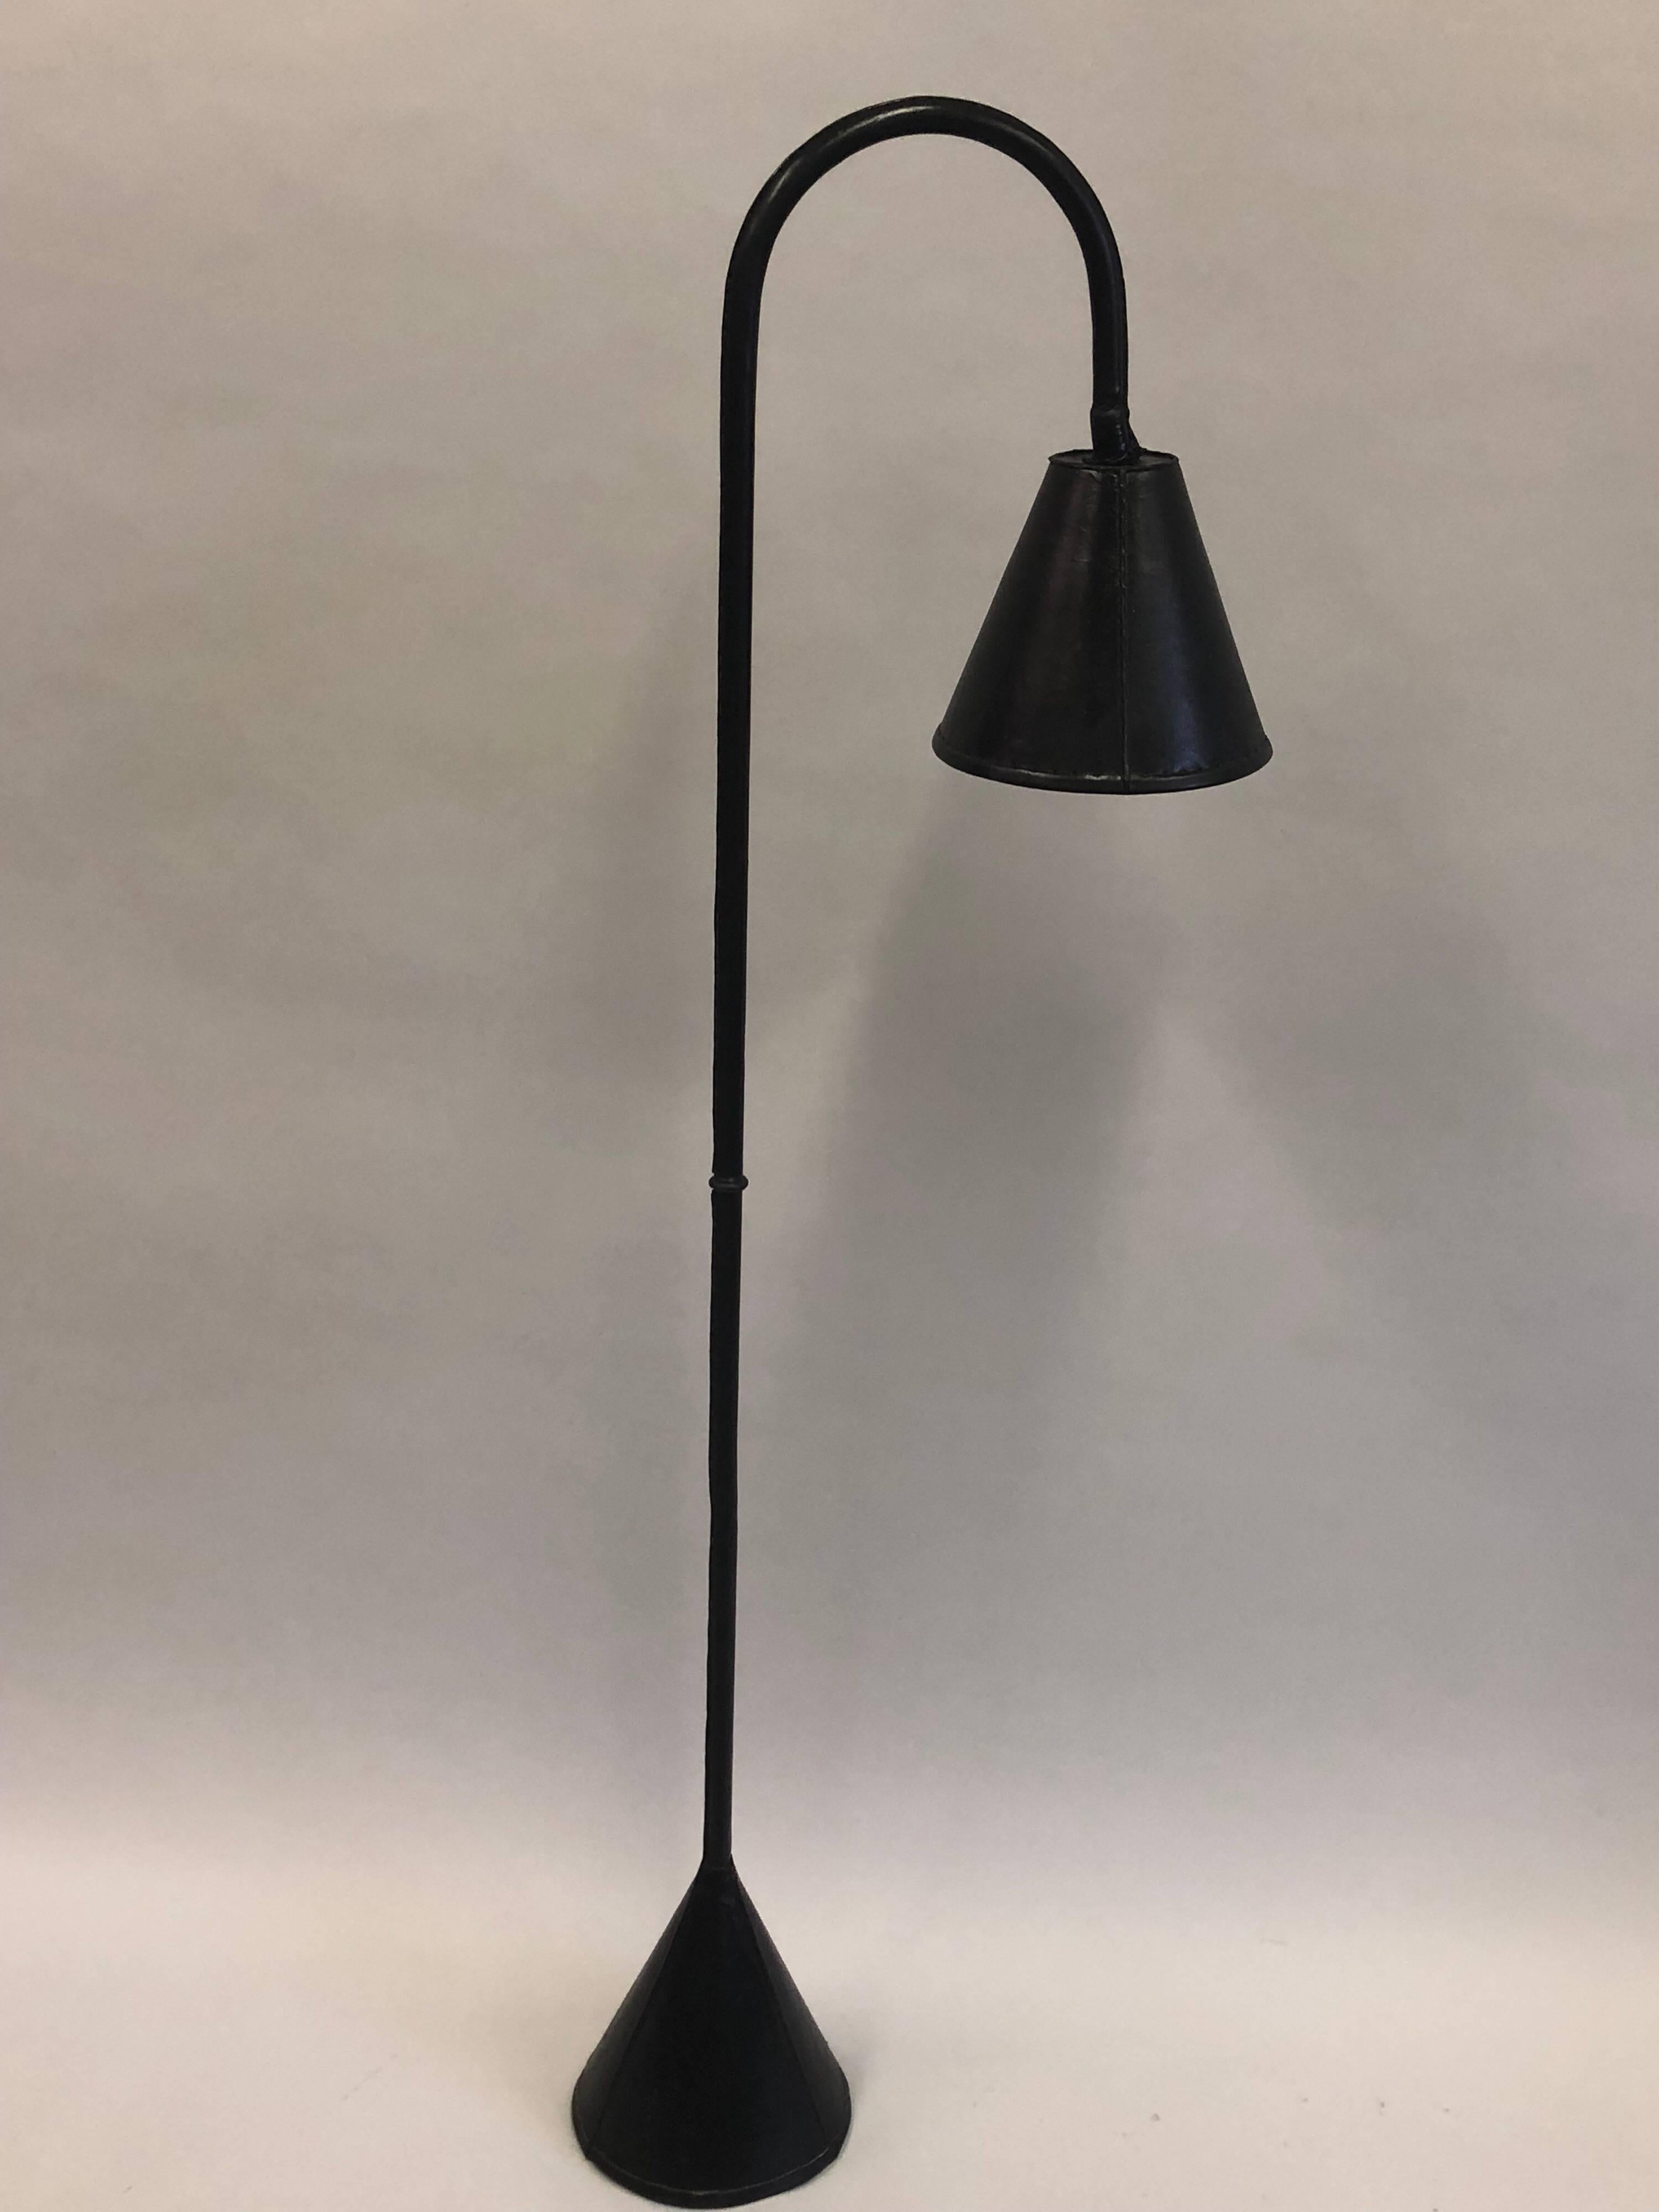 Hand-Crafted Pair, French Midcentury Hand-stitched Black Leather Floor Lamps by Jacques Adnet